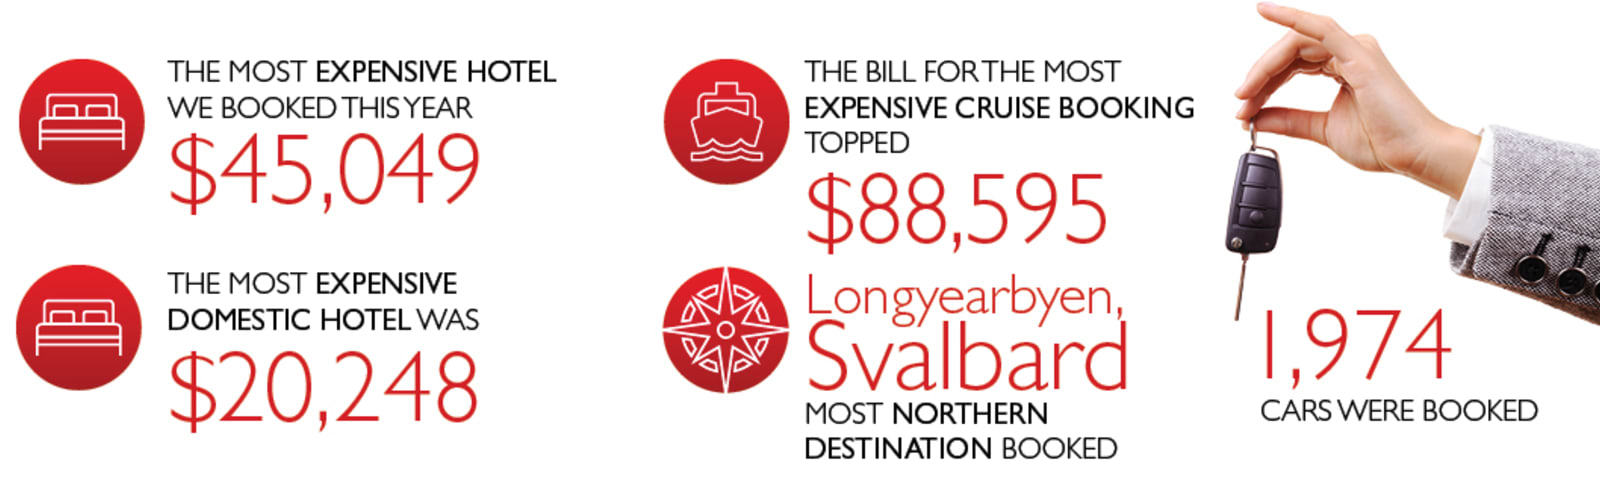 Top travel facts of 2022 infographic